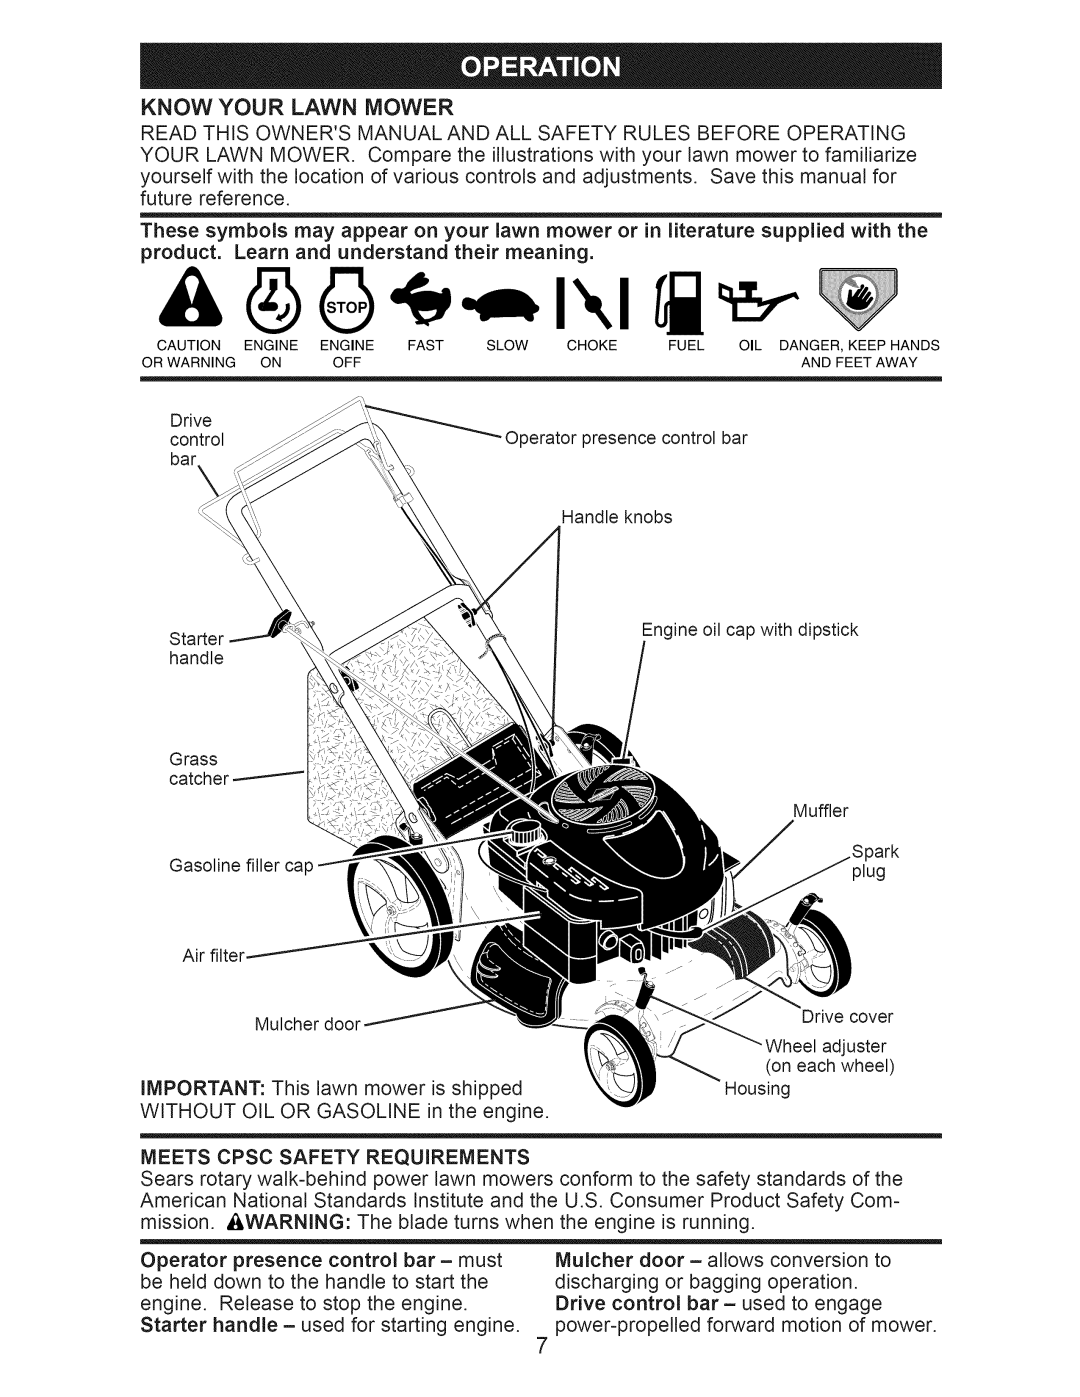 Craftsman 917.376405 owner manual Know Your Lawn Mower, Meets Cpsc Safety Requirements 